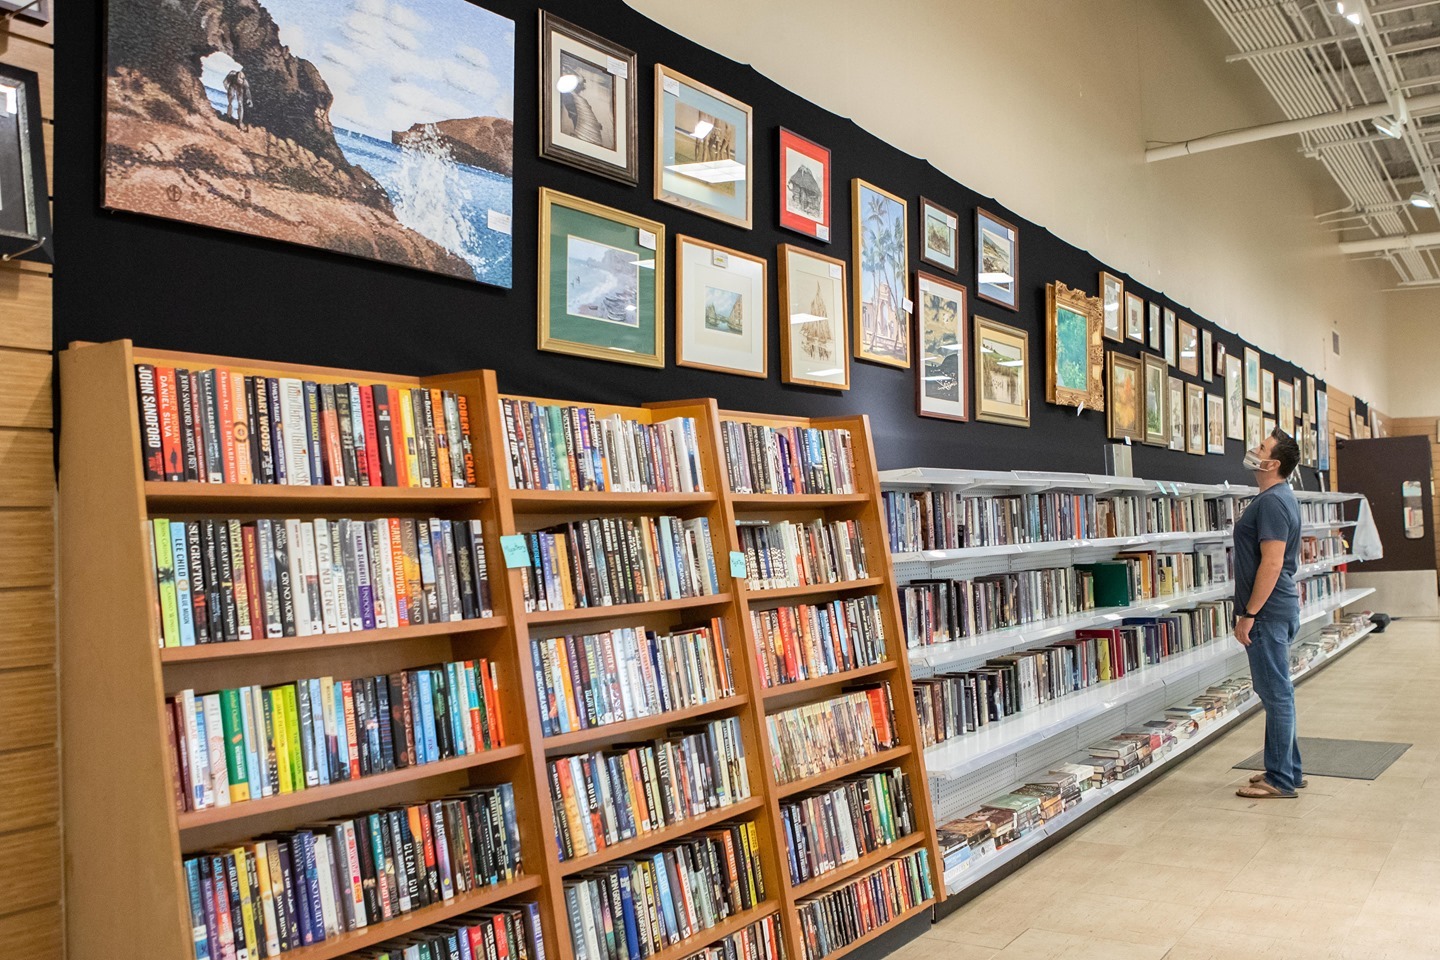 We’re excited to announce that we’re partnering with @hawaiilibraryfriends to bring a very special pop-up to the community! Village Books & Music, co-presented by Hawaii State Federal Credit Union and Ward Village, will open to the public on February 27, in the former location of Pier 1 Imports. Browse an impressive collection of books, music, and media, while also supporting Hawai`i’s public libraries. Save the date and we’ll see you there! 

Open Tuesday-Saturday from 10am-7pm, and Sundays from 10am-5pm.